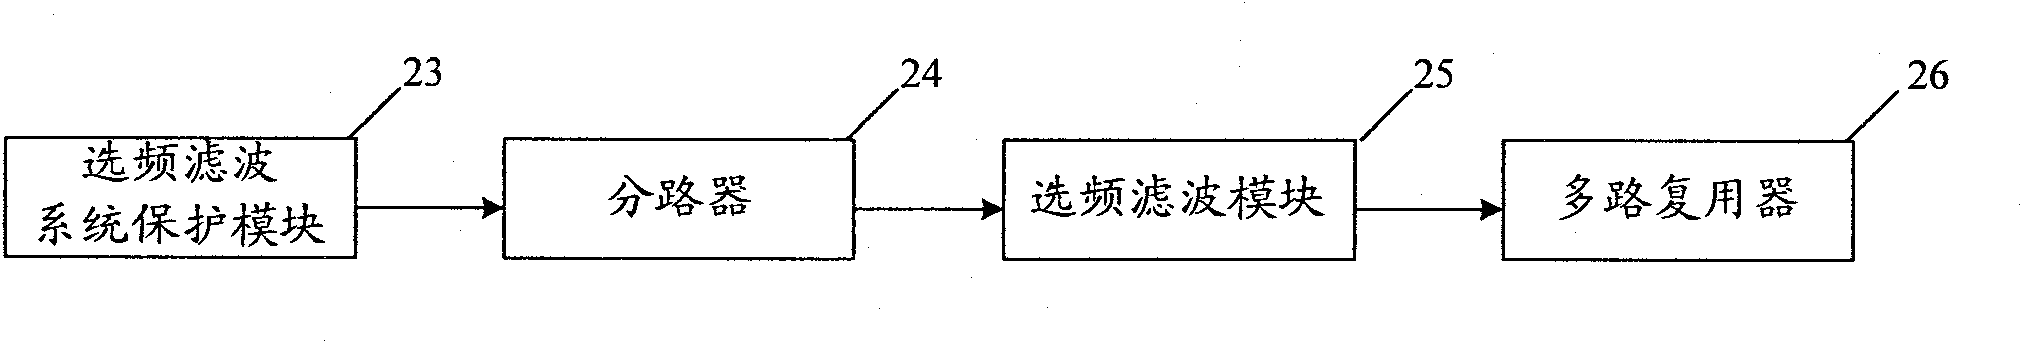 Digital up/down frequency conversion system and implementation method thereof